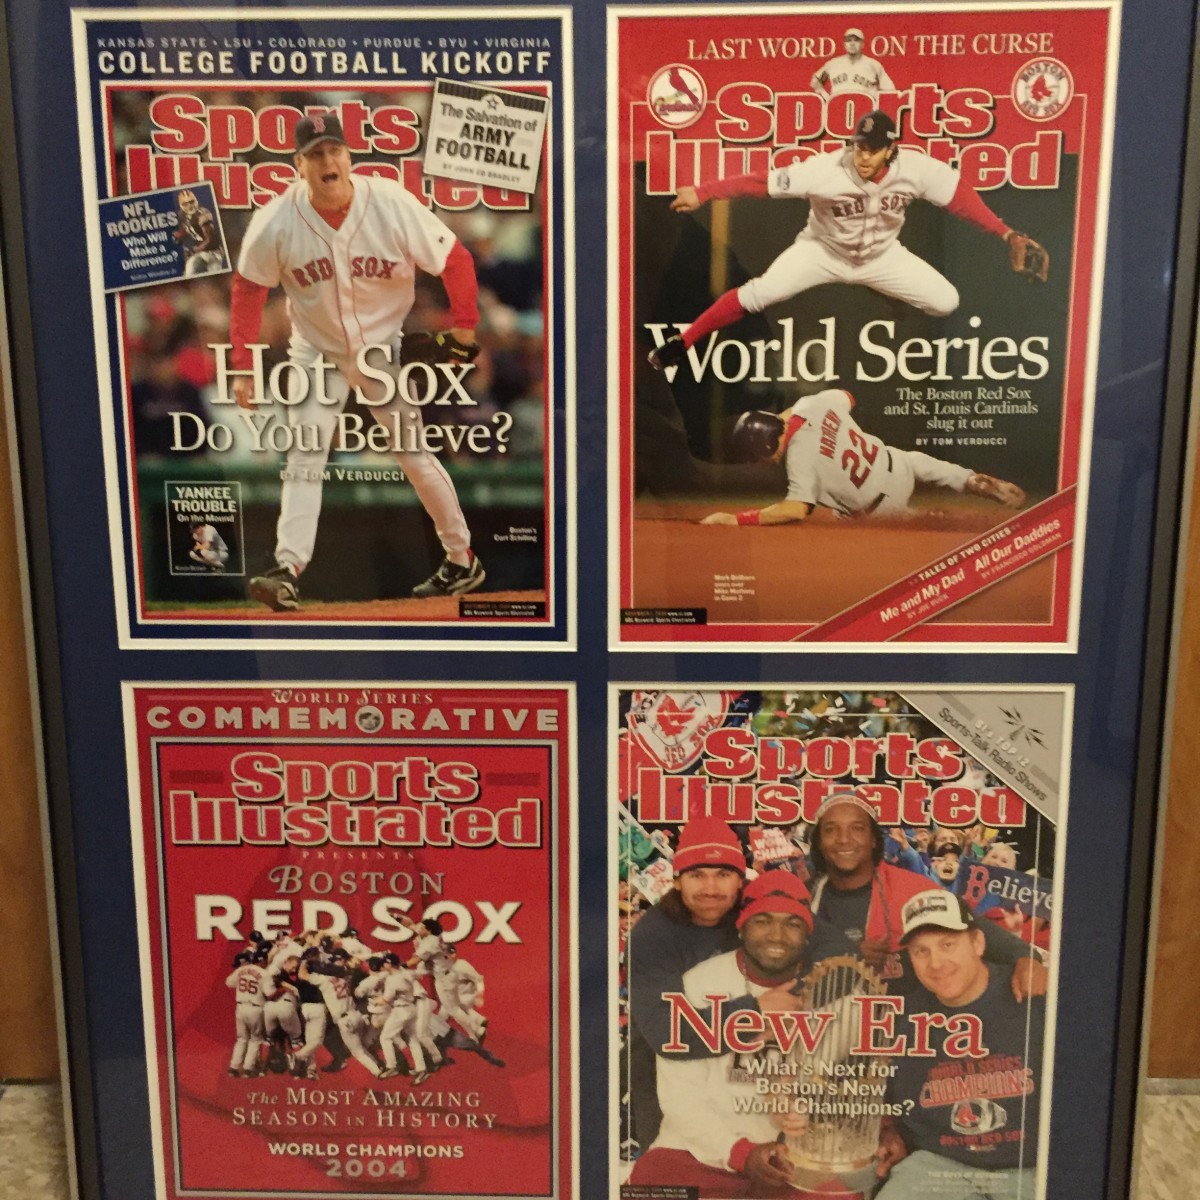 Boston Red Sox Vs St. Louis Cardinals, 2004 World Series Sports Illustrated  Cover Art Print by Sports Illustrated - Sports Illustrated Covers